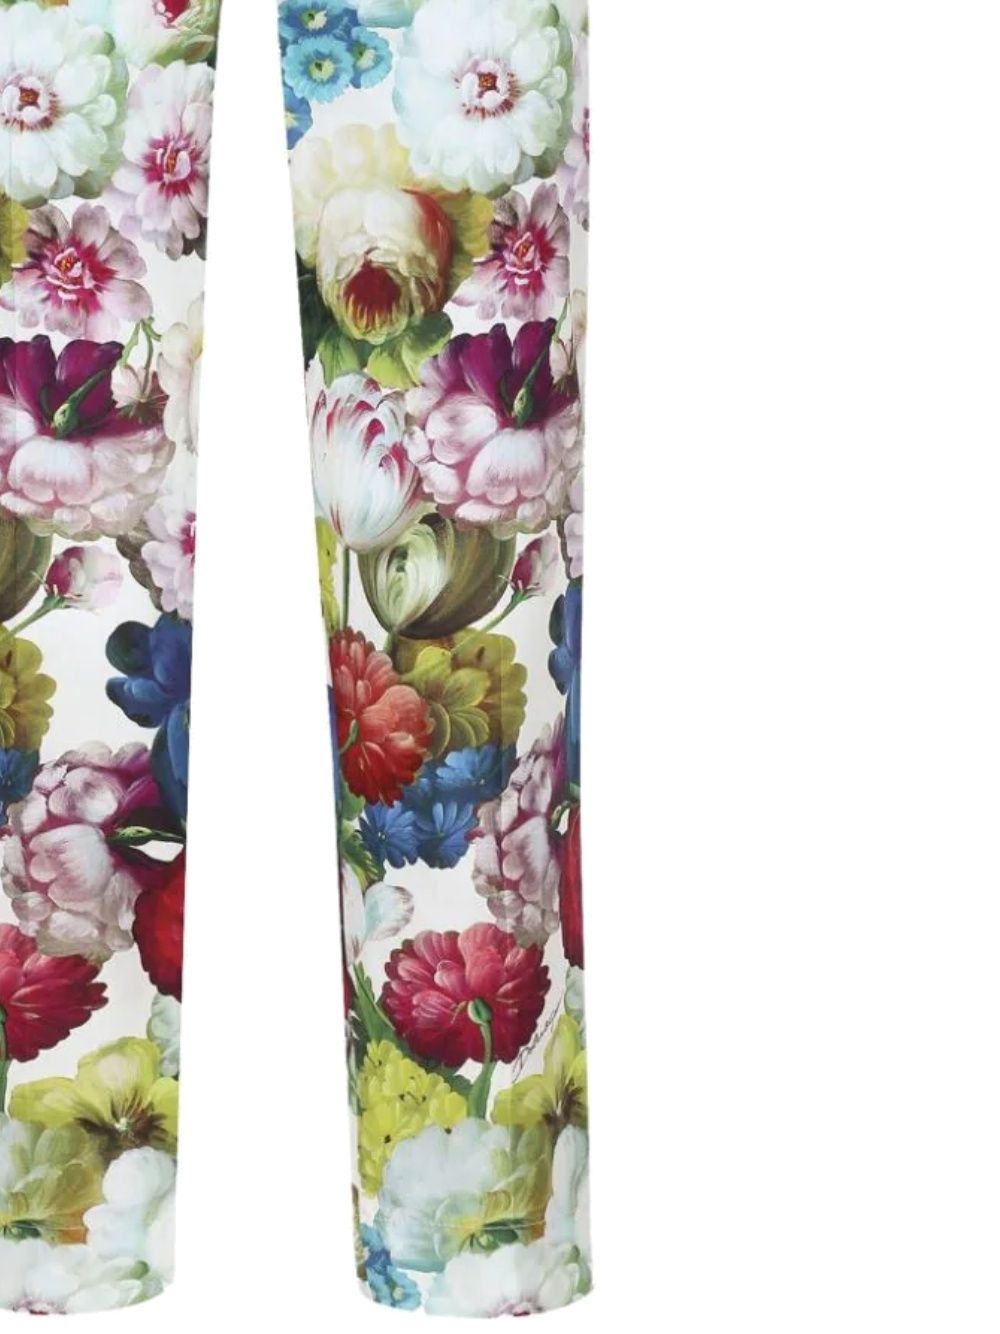 Miticolor trousers with floral print